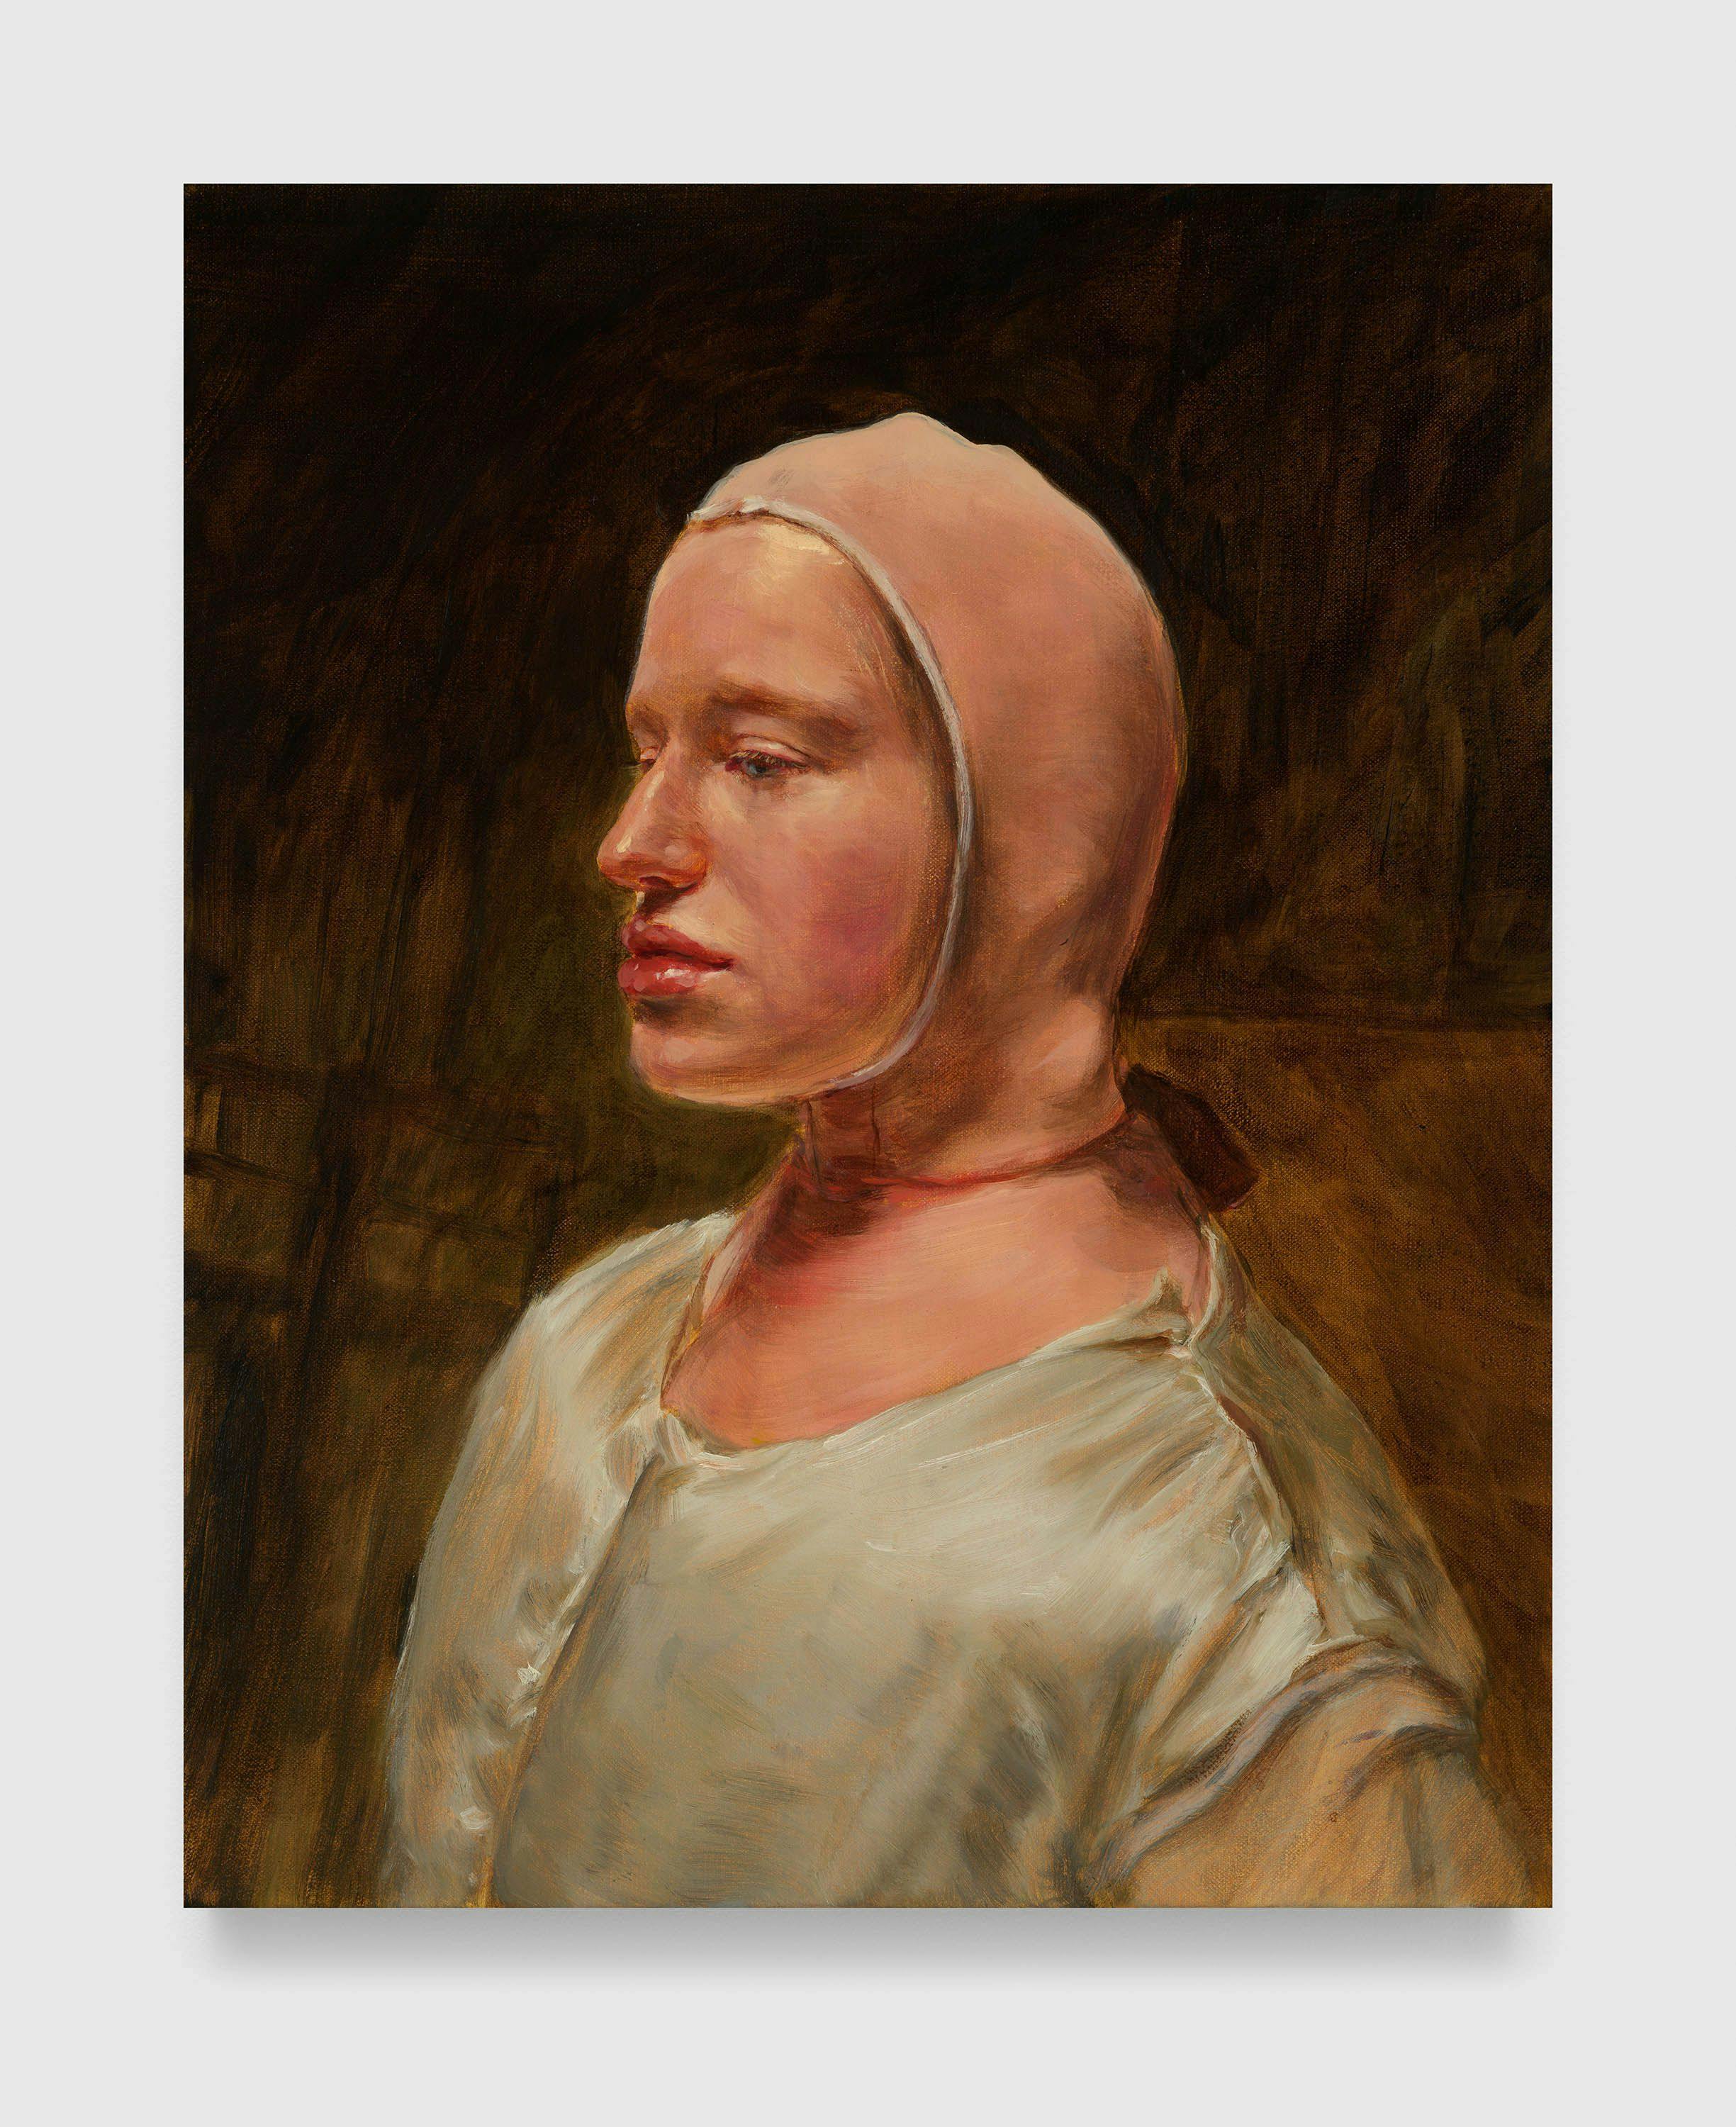 A painting by Michaël Borremans, titled The Double II, dated 2022.